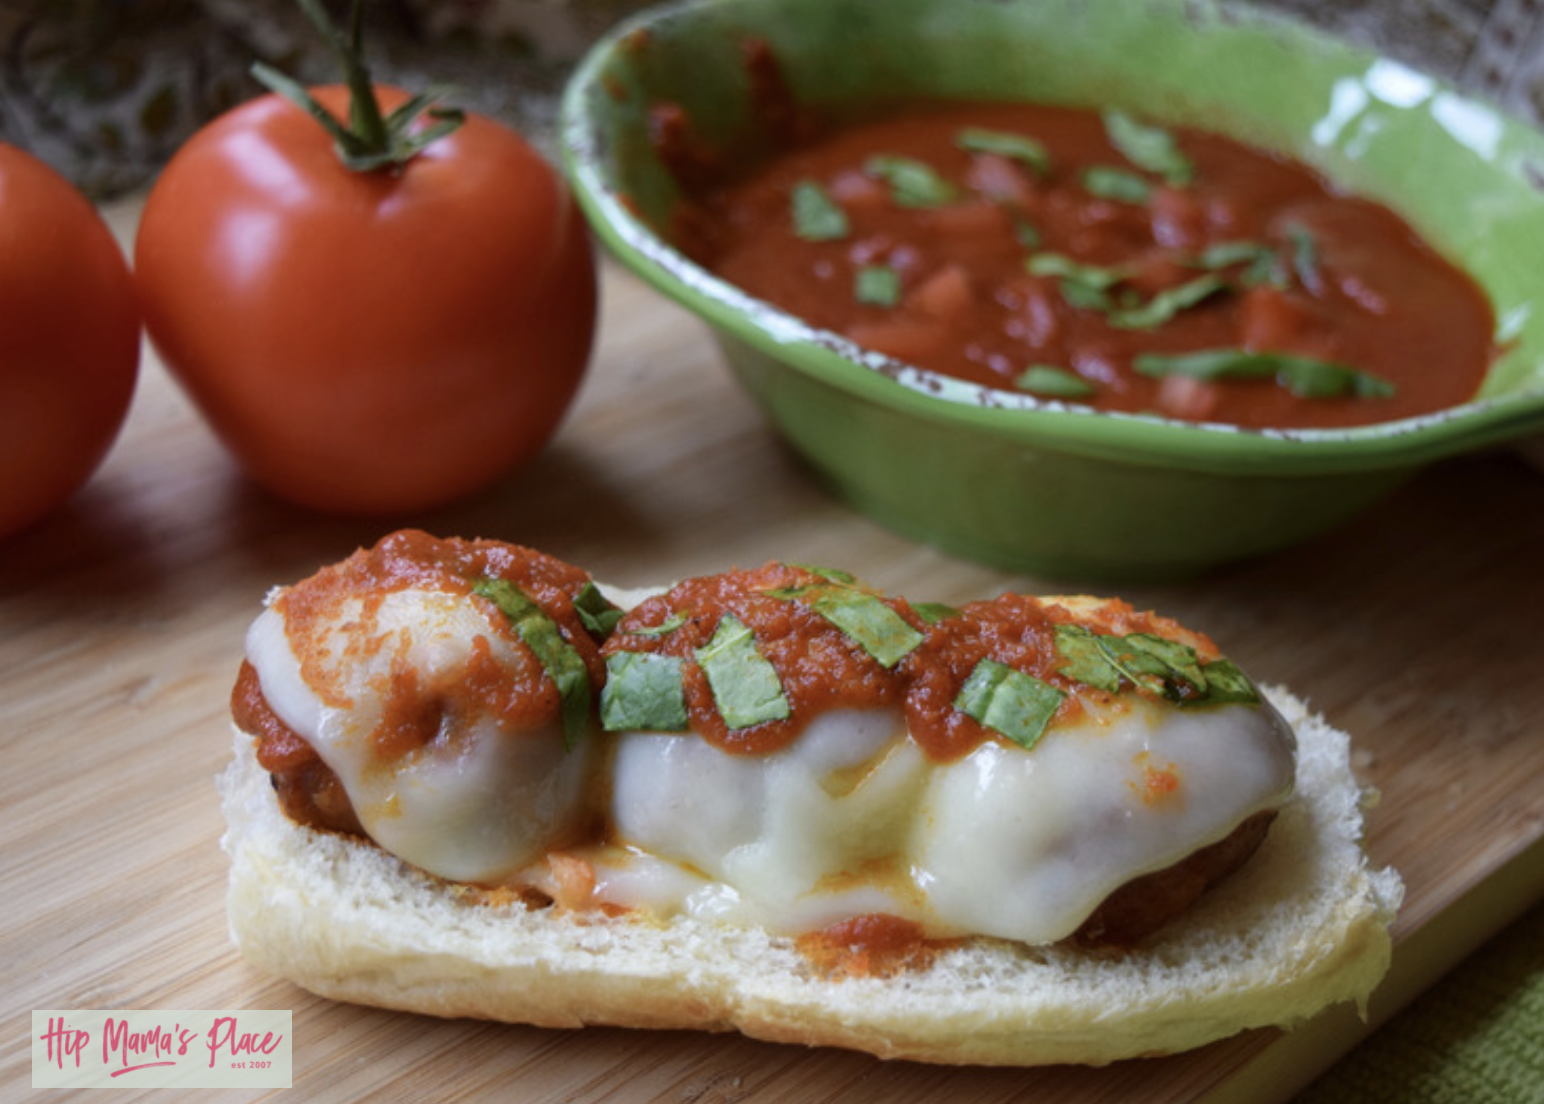 Simplify dinner tonight and make these Easy Italian Meatball Sandwiches made with Carando brand Abruzzese Recipe Italian Style Meatballs at Food Lion!